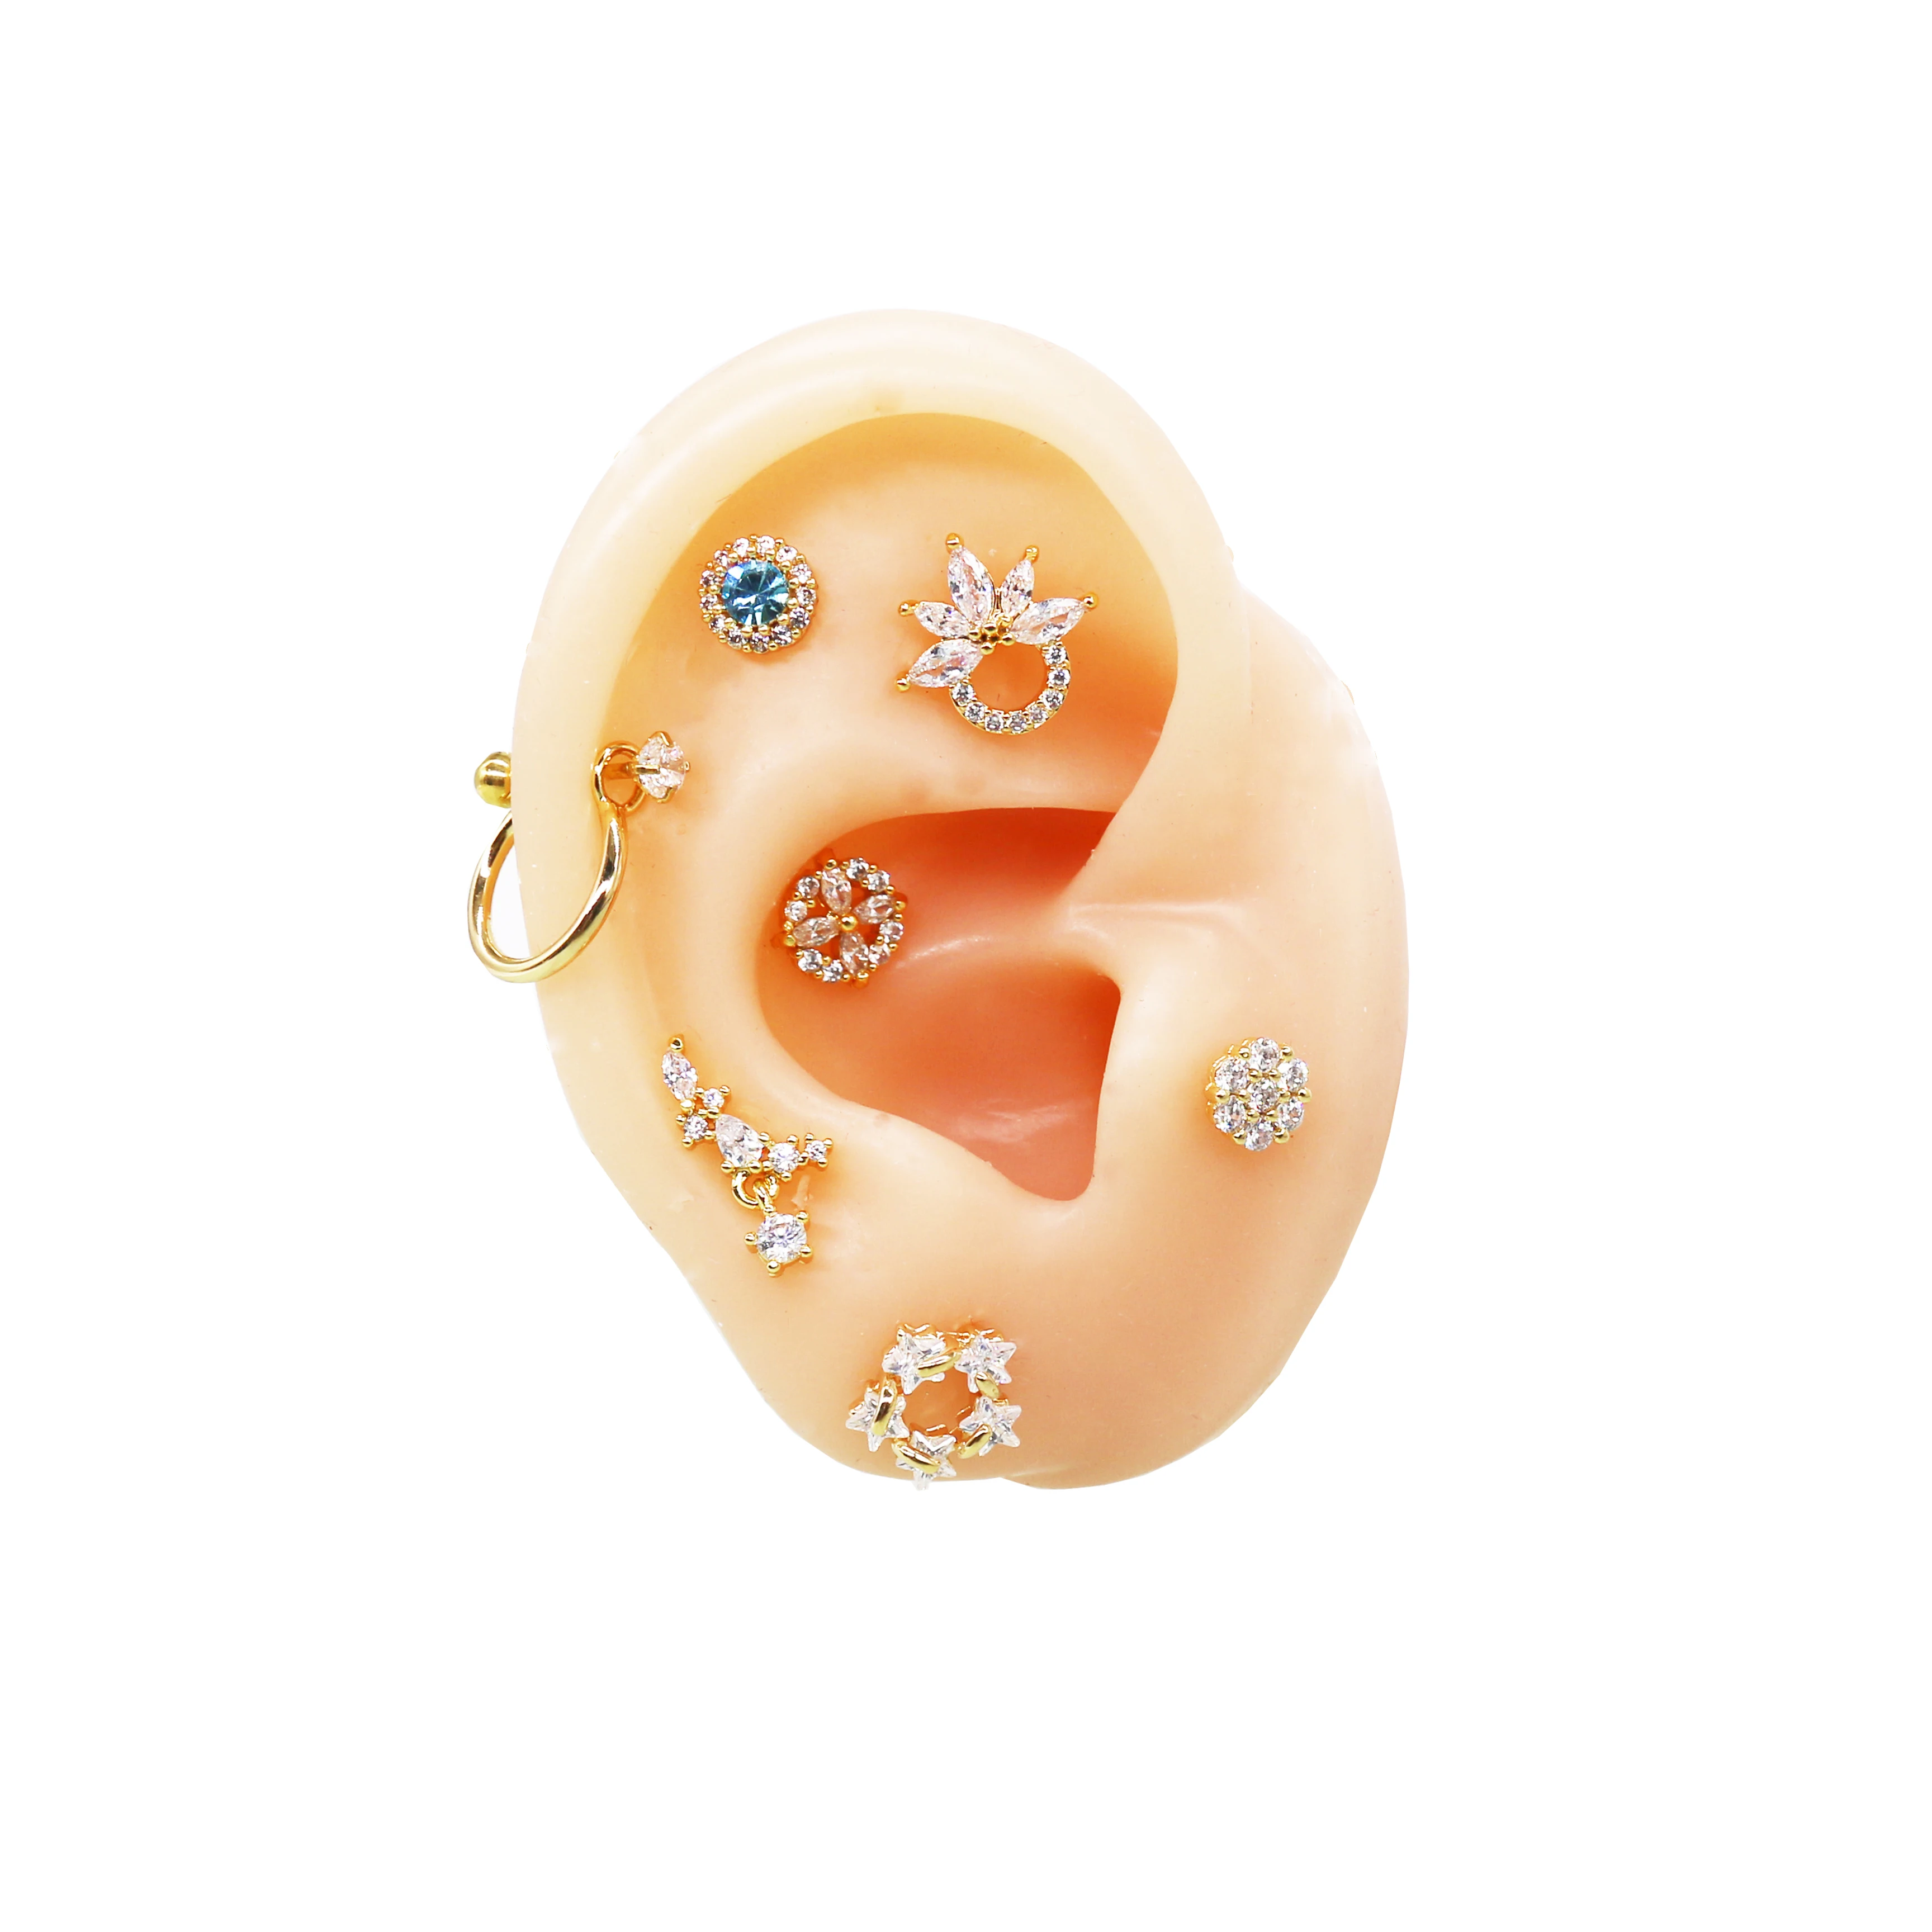 

Gaby Customized 316L Surgical Steel CZ Earring Studs hoops Cartilage Tragus with model display Piercing Jewelry, Steel/ gold/ rose gold